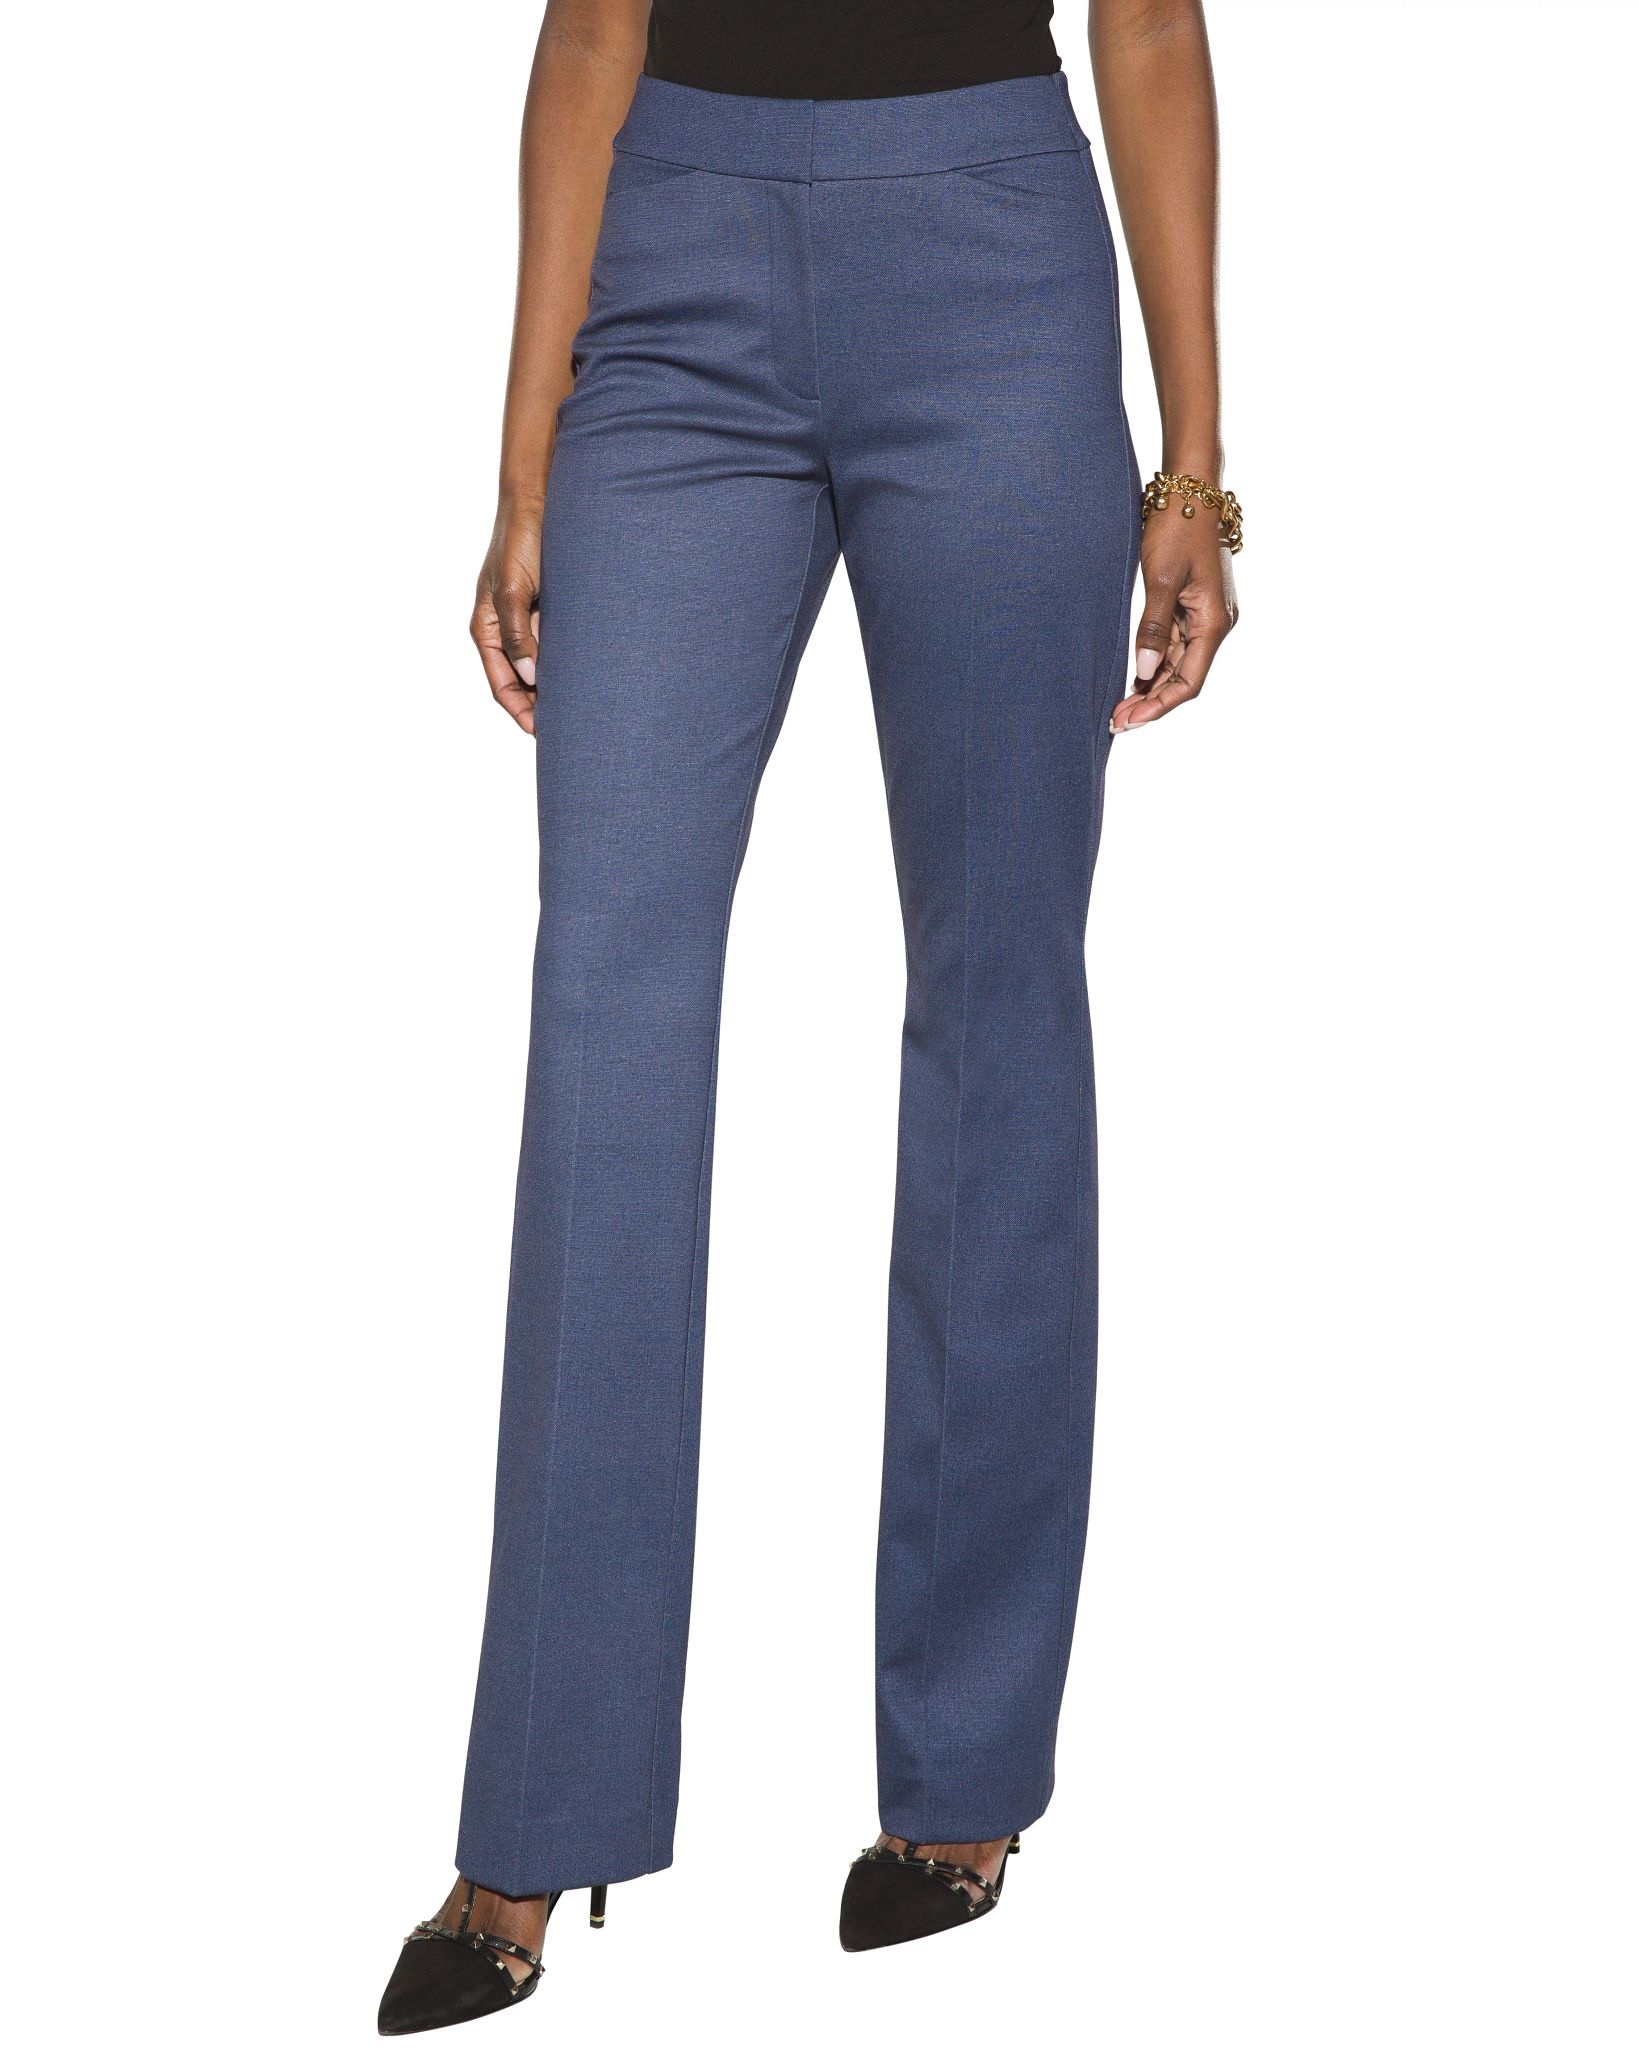 Outlet WHBM The Slim Boot Pants